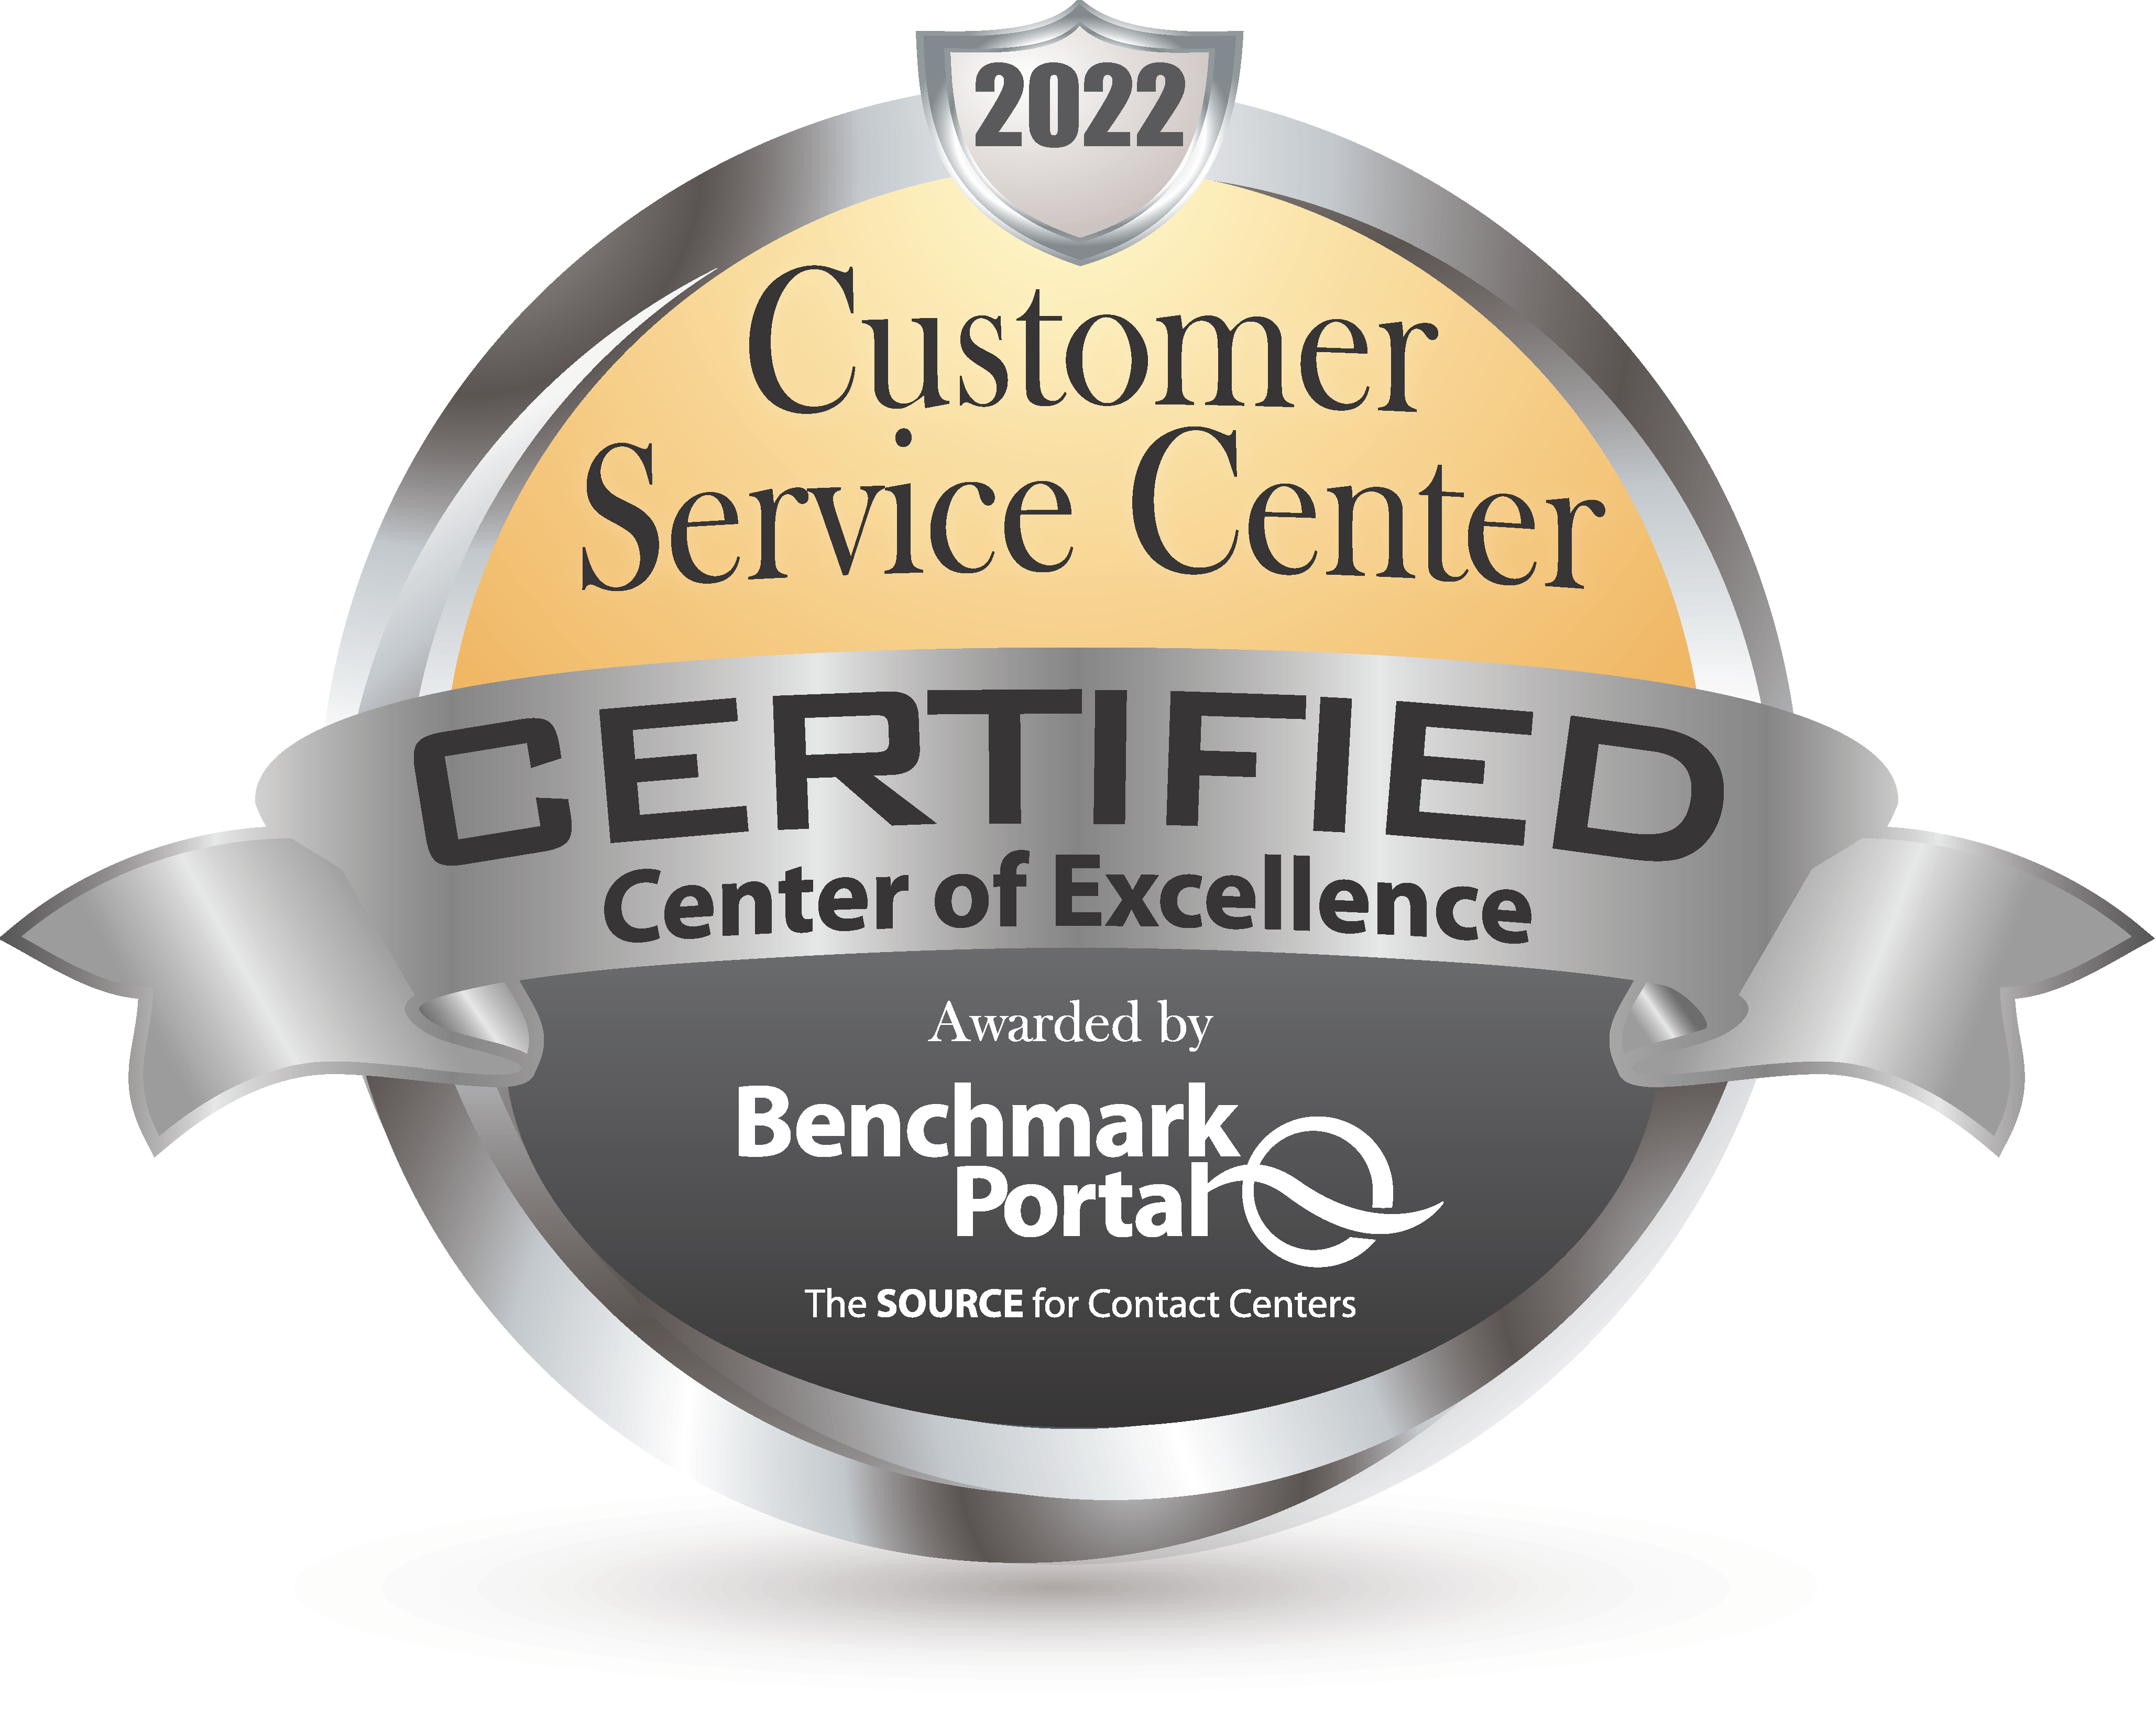 Customer Service Center Certified Center of Excellence image